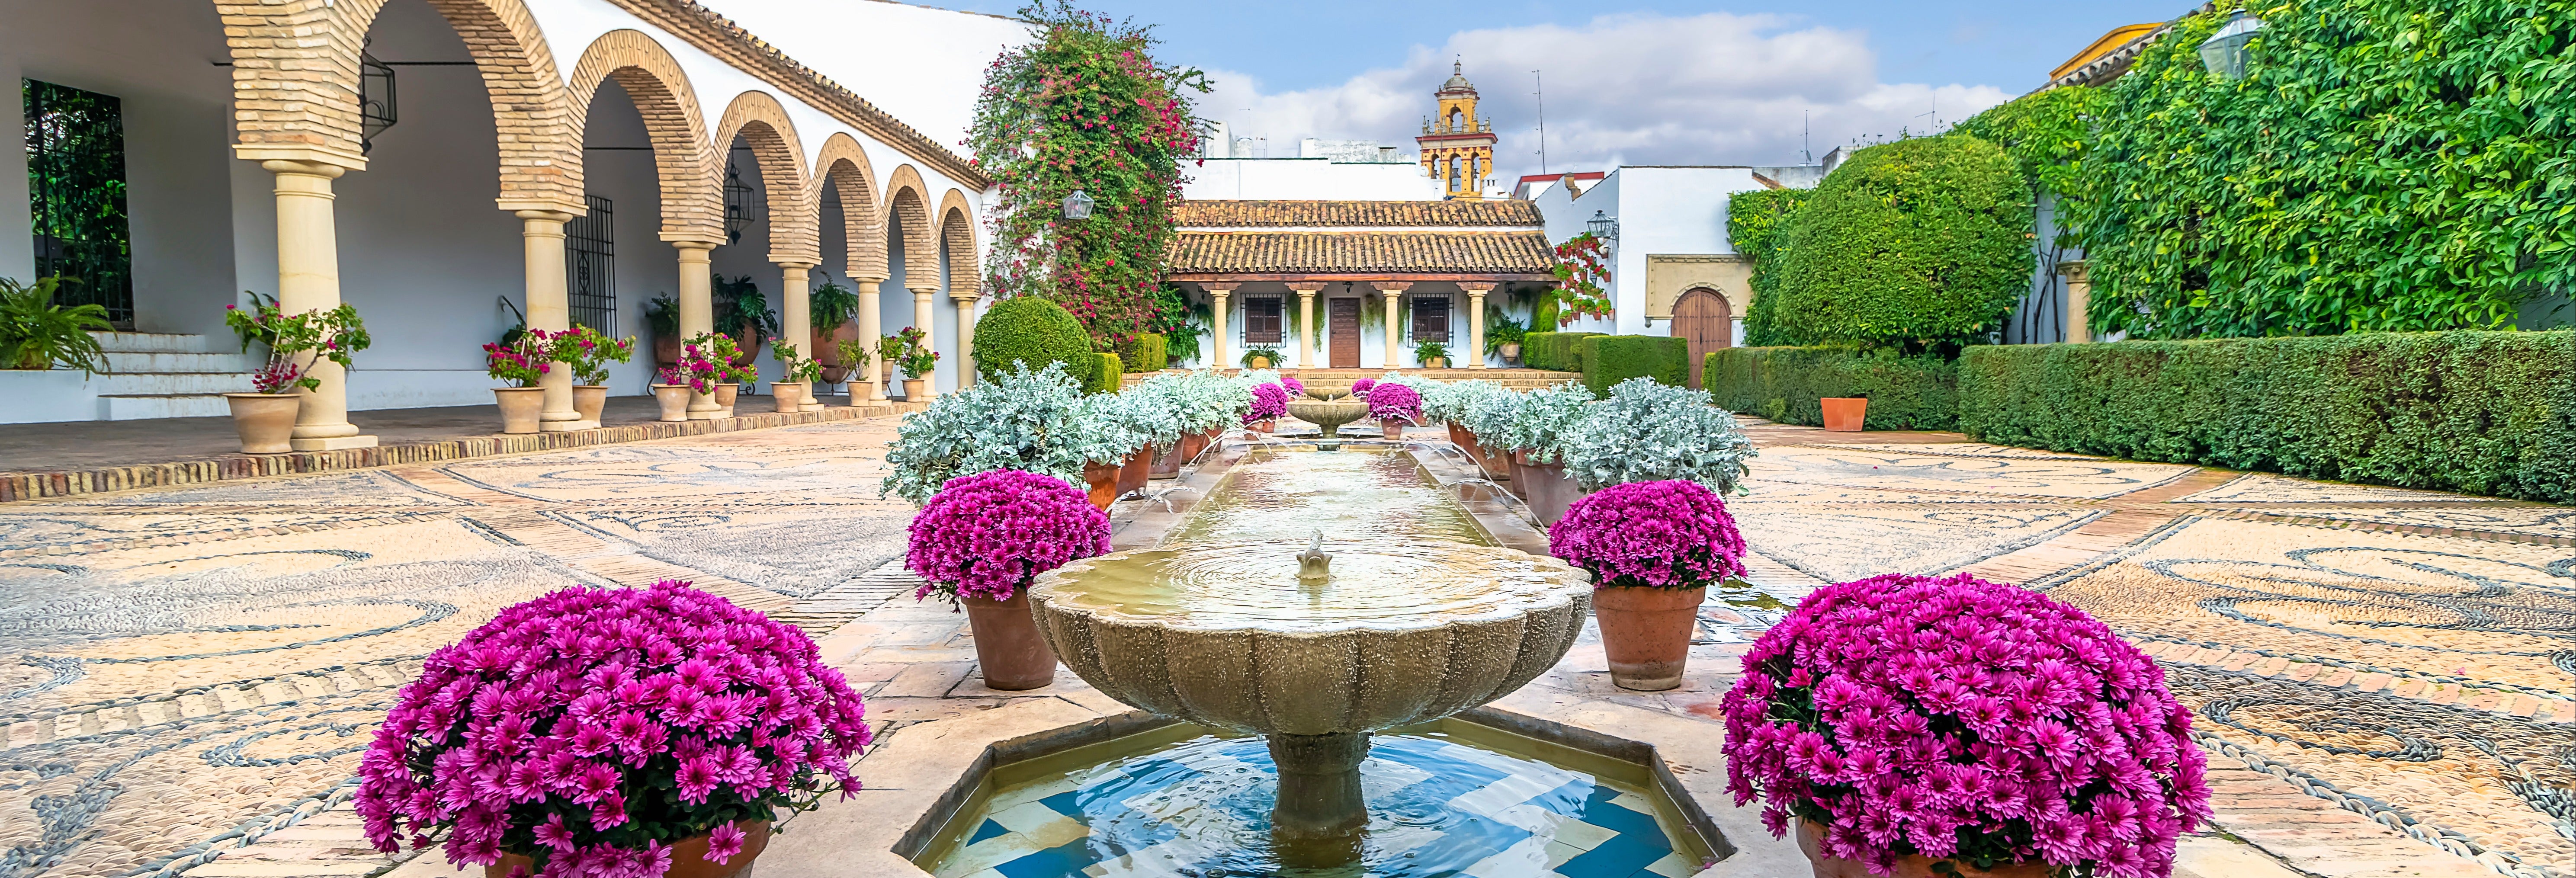 Viana Palace & Courtyards Guided Tour